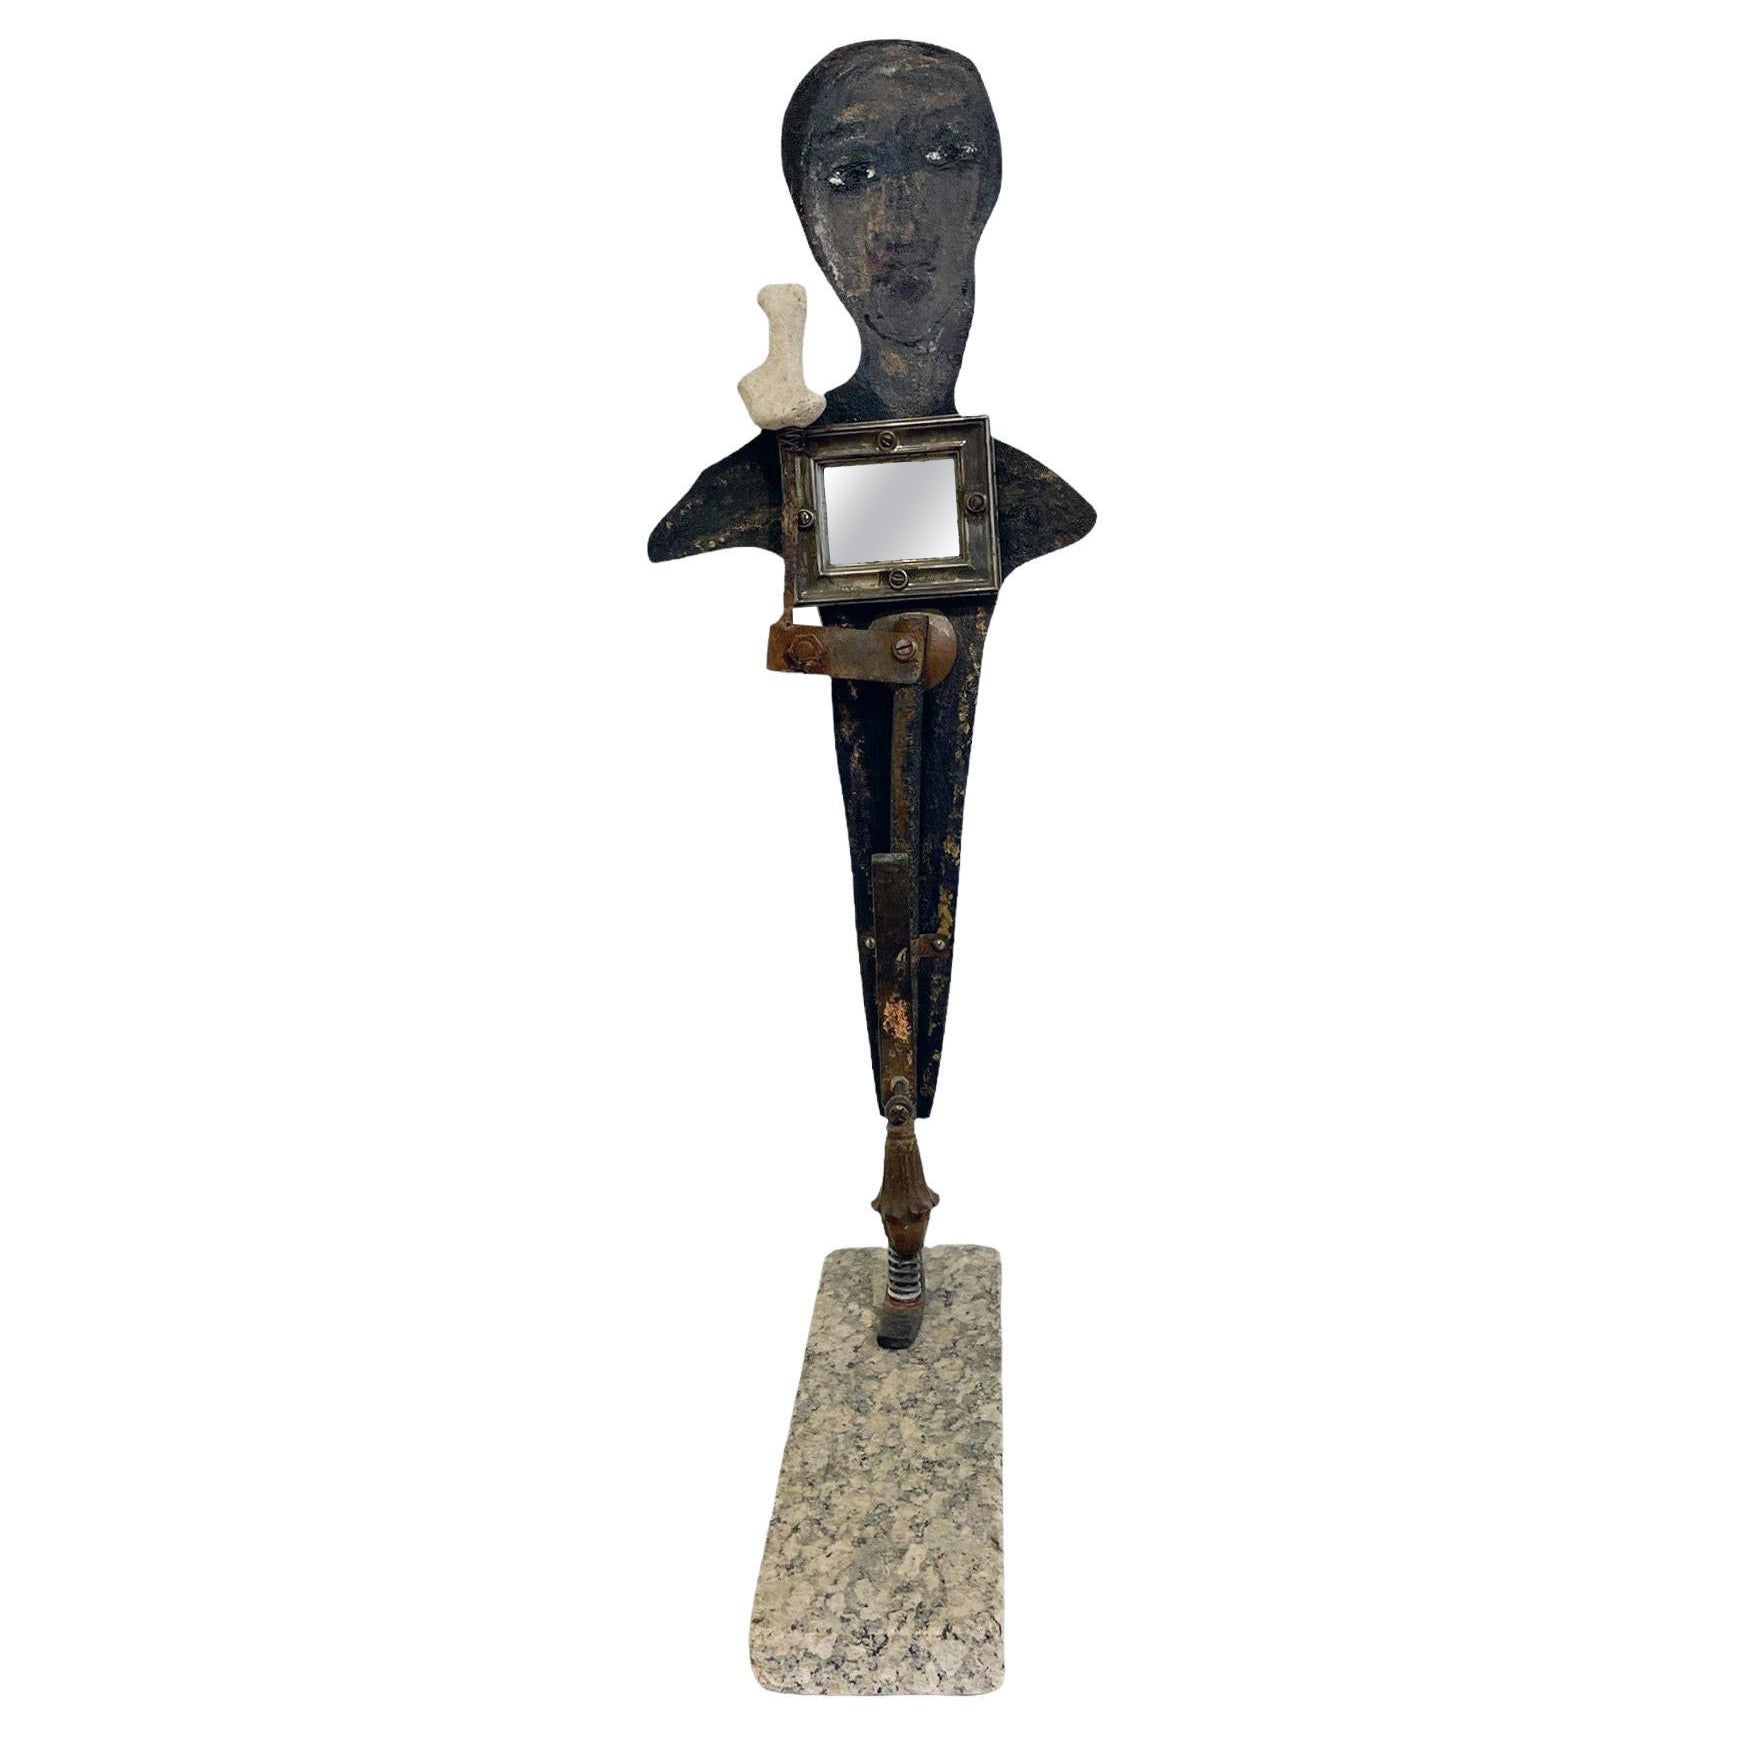 Dali as an Idol, Sculptural Construction W / Mirror, Painting and Found Objects